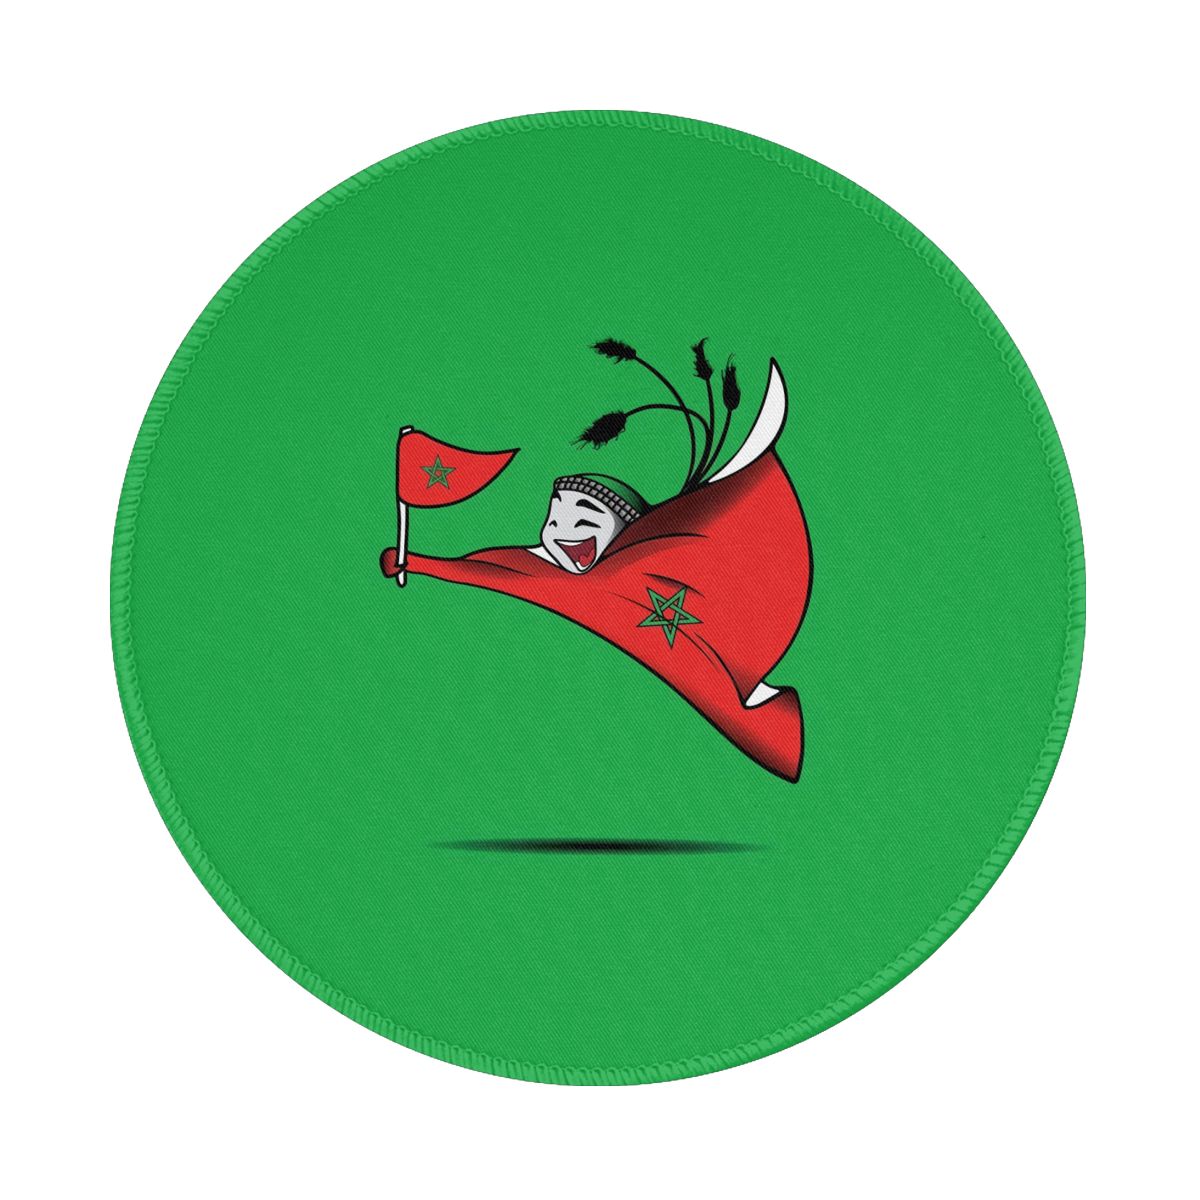 Morocco World Cup 2022 Mascot Gaming Round Mousepad for Computer Laptop